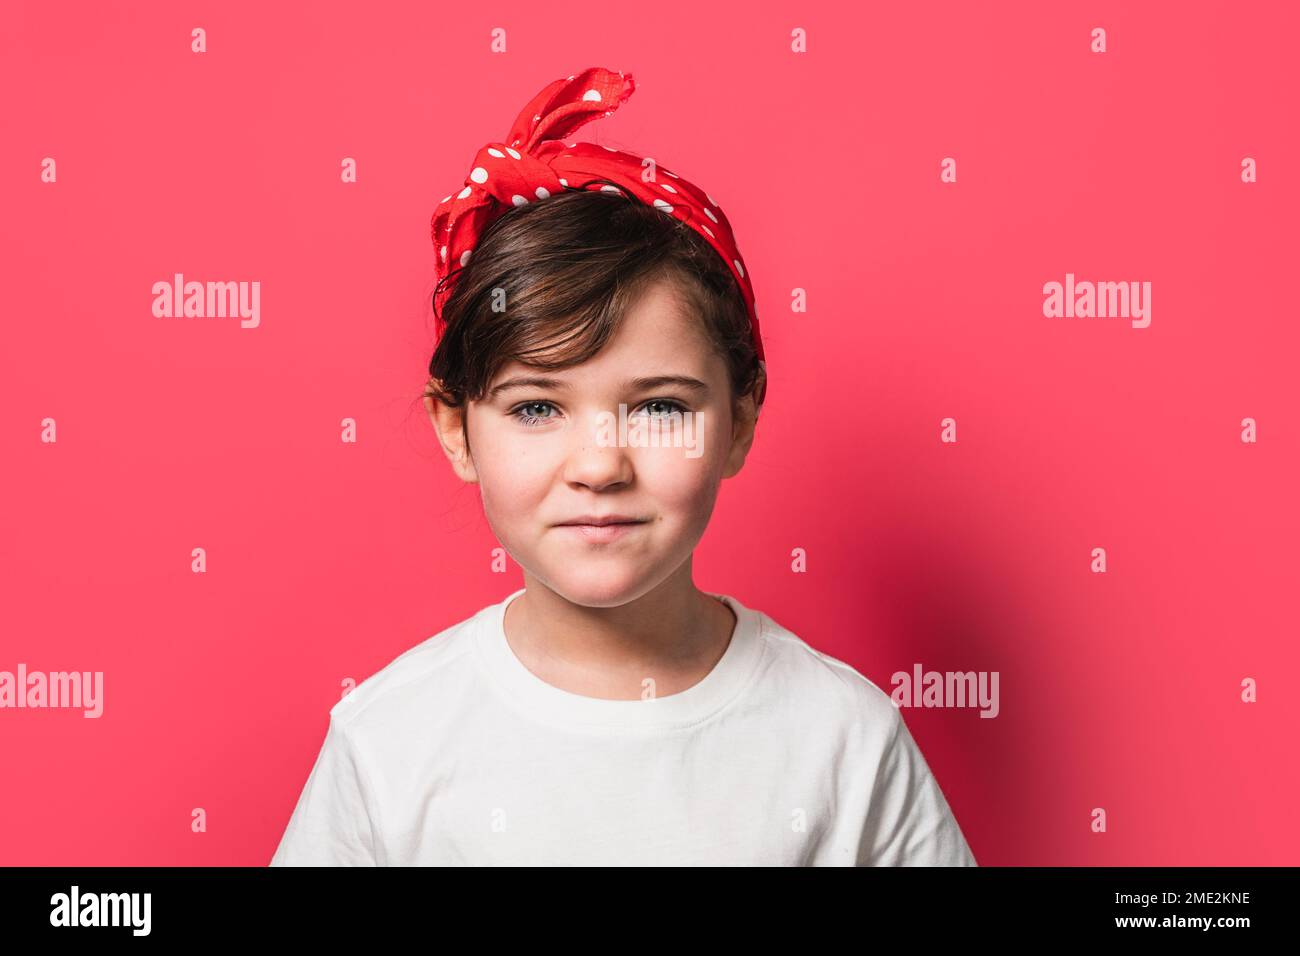 Adorable little girl in white t shirt with red polka dot headband looking at camera while standing against pink background Stock Photo